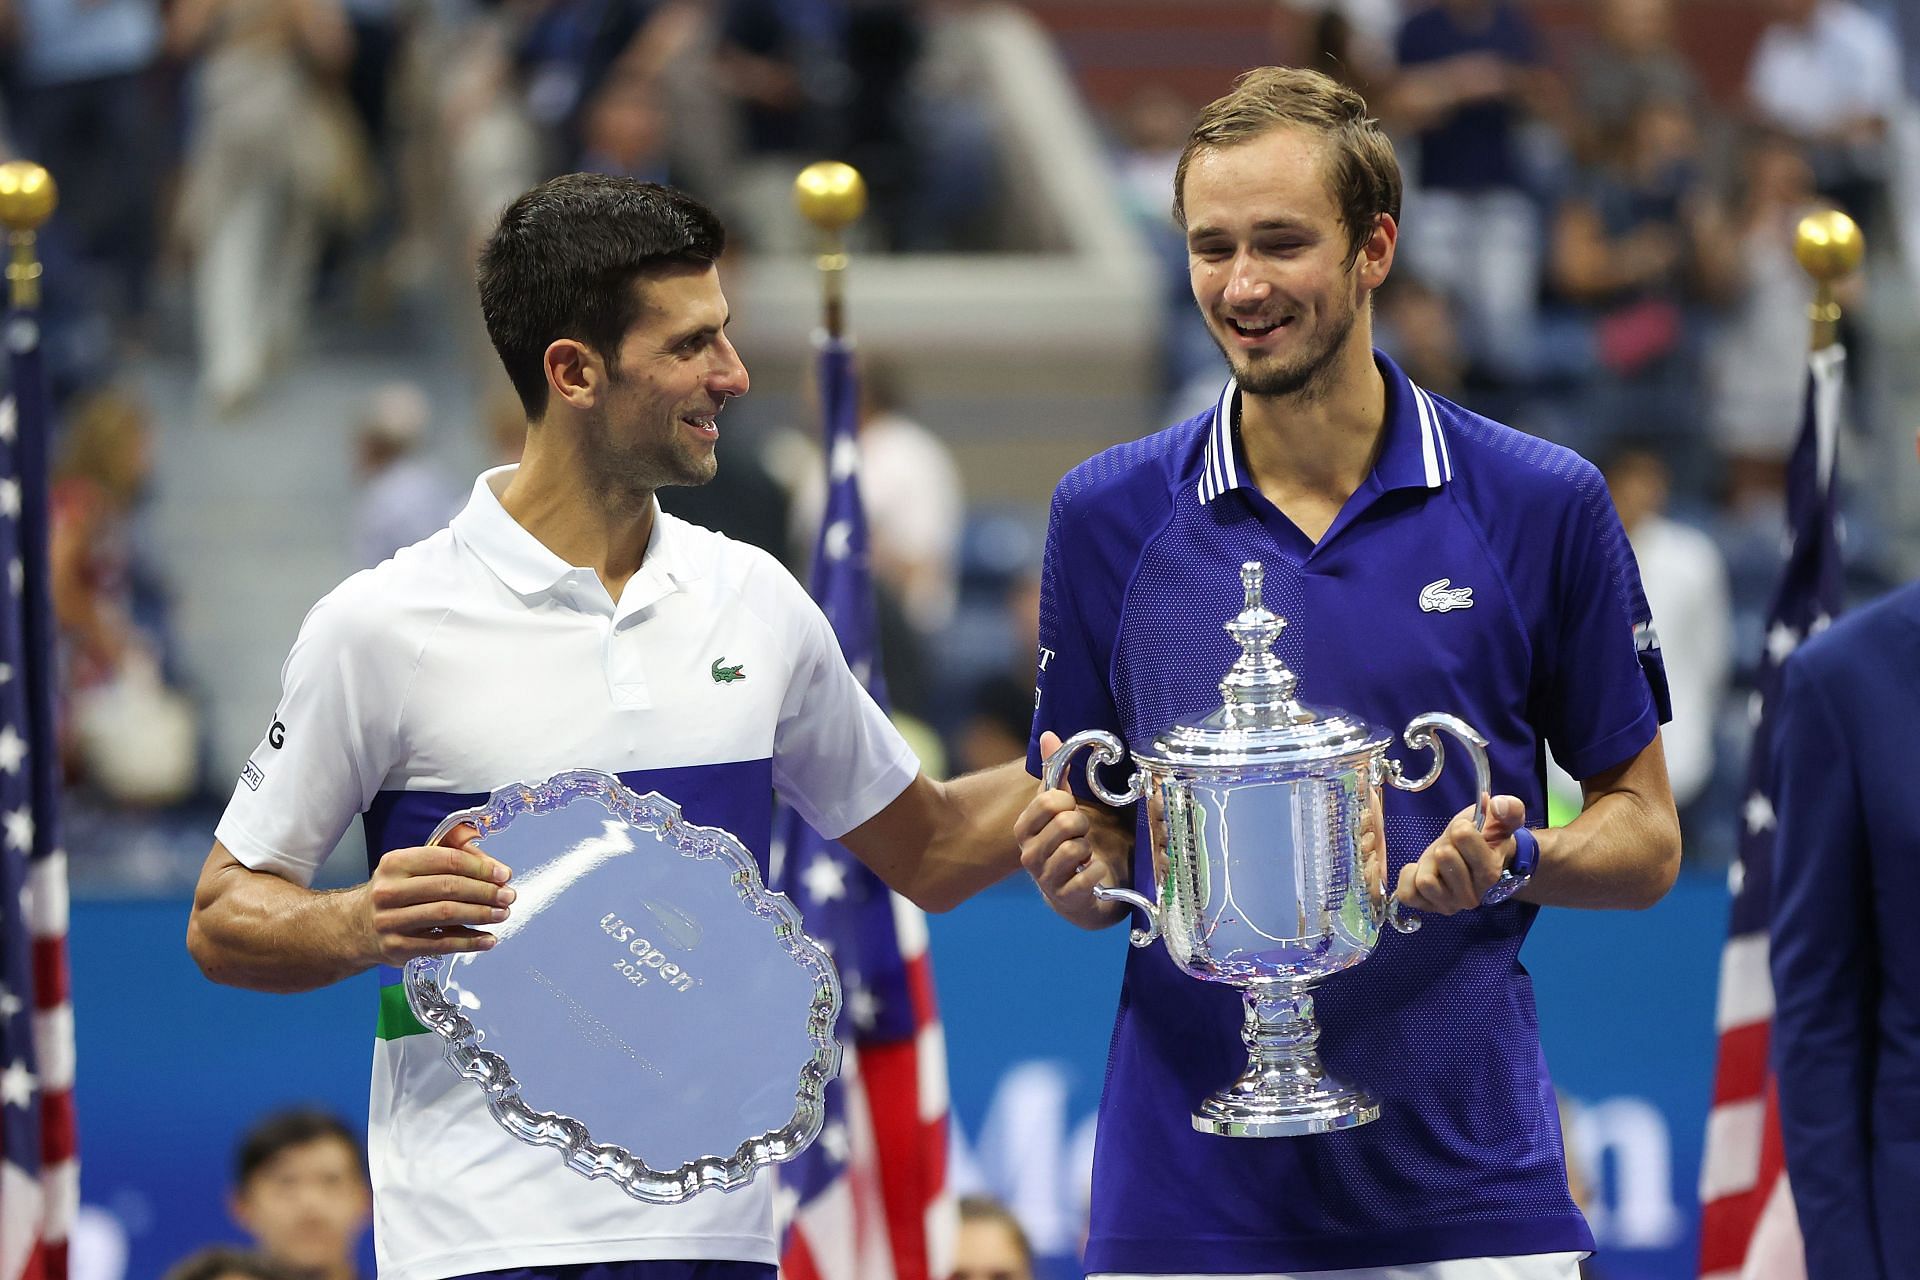 Novak Djokovic and Daniil Medvedev share a moment after the US Open Men&#039;s Final at New York in September 2021